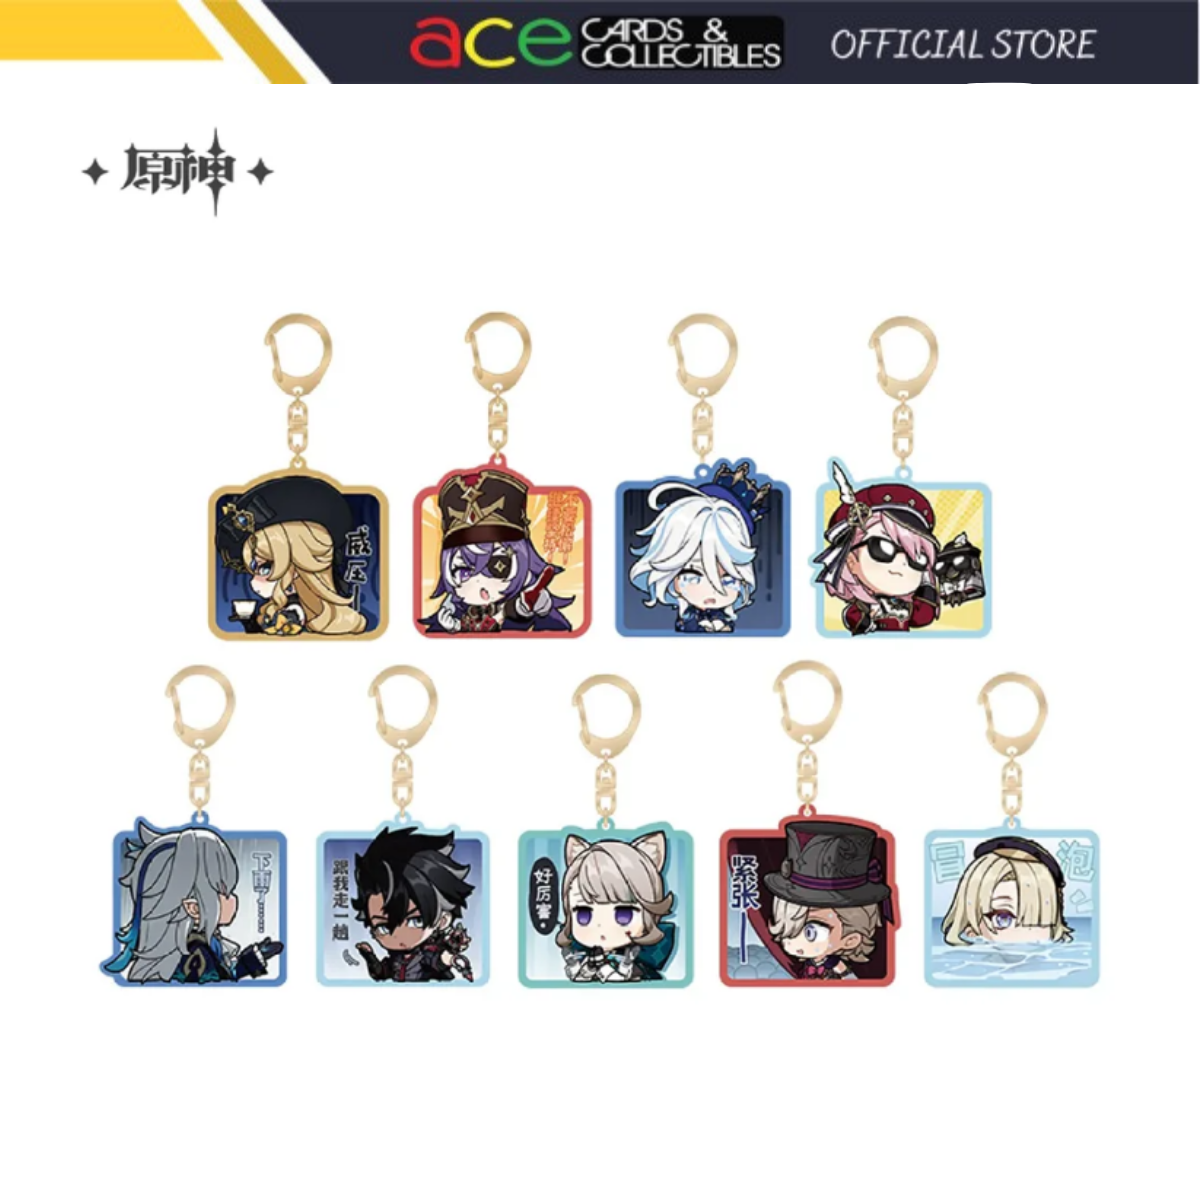 miHoYo Genshin Impact Chibi Fontaine Character Expression Sticker Keychain-Lyney-miHoYo-Ace Cards & Collectibles